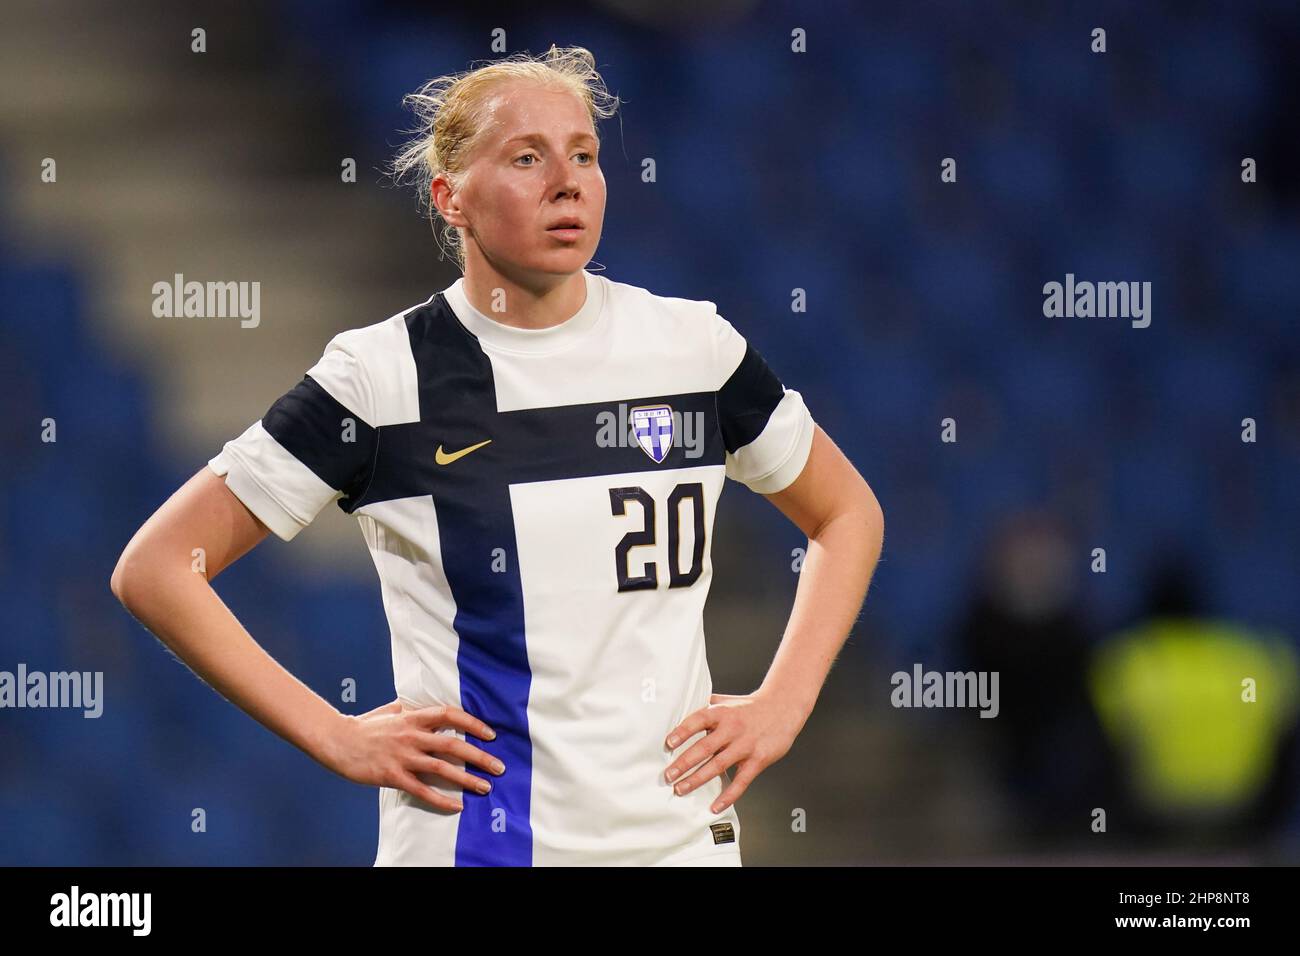 LE HAVRE, FRANCE - FEBRUARY 19: Eveliina Summanen of Finland during the  Tournoi de France 2022 match between Finland and Netherlands at Stade  Oceane on February 19, 2022 in Le Havre, France (